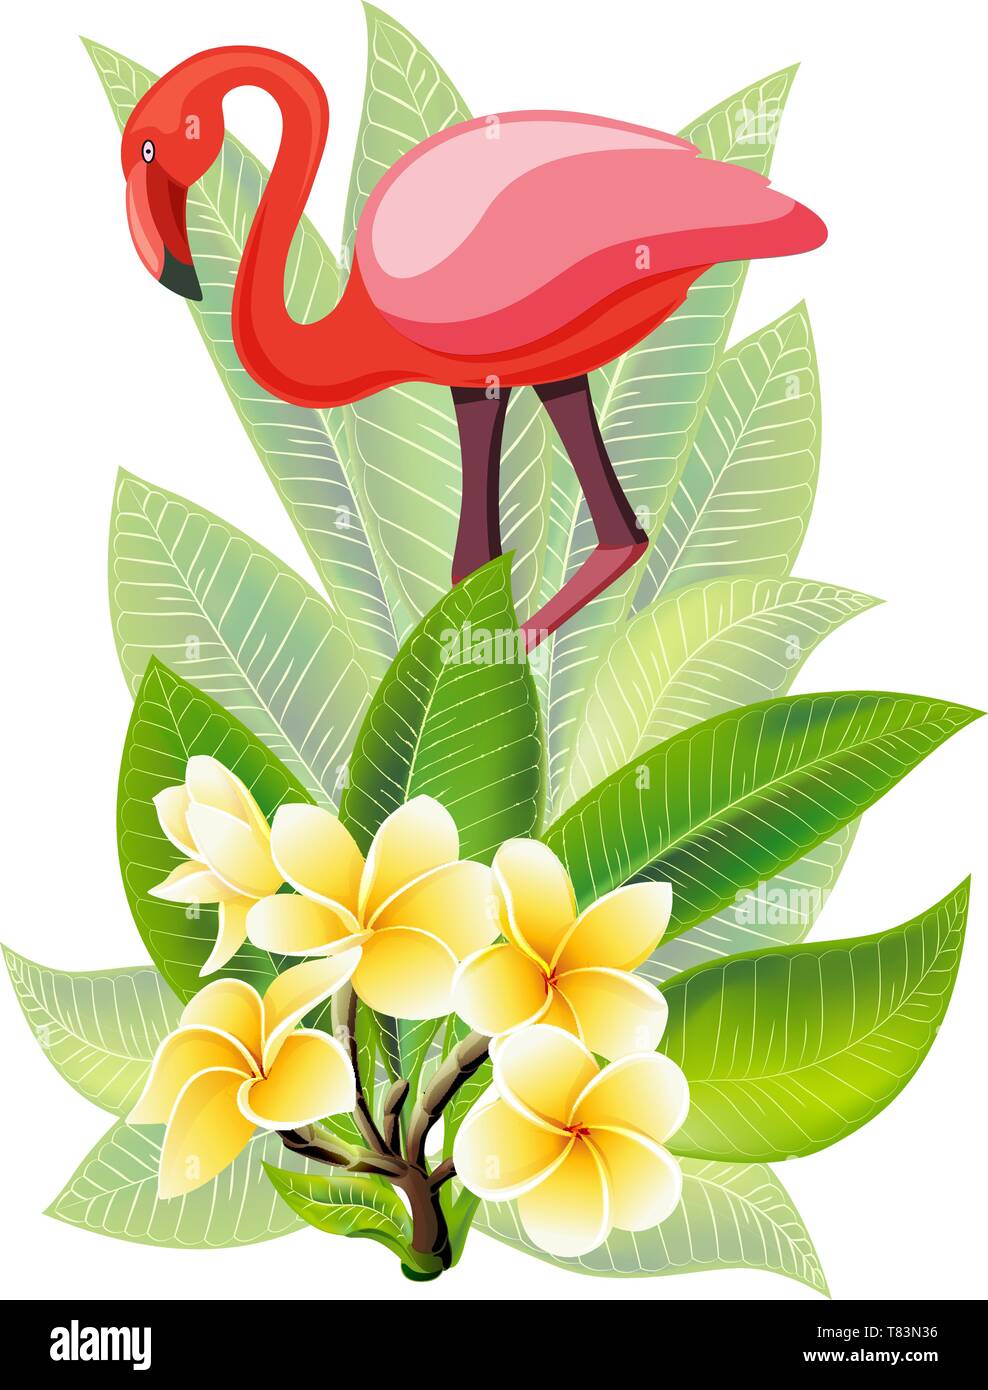 Summer design for advertising with flamingo, tropical leaves and flowers Stock Vector